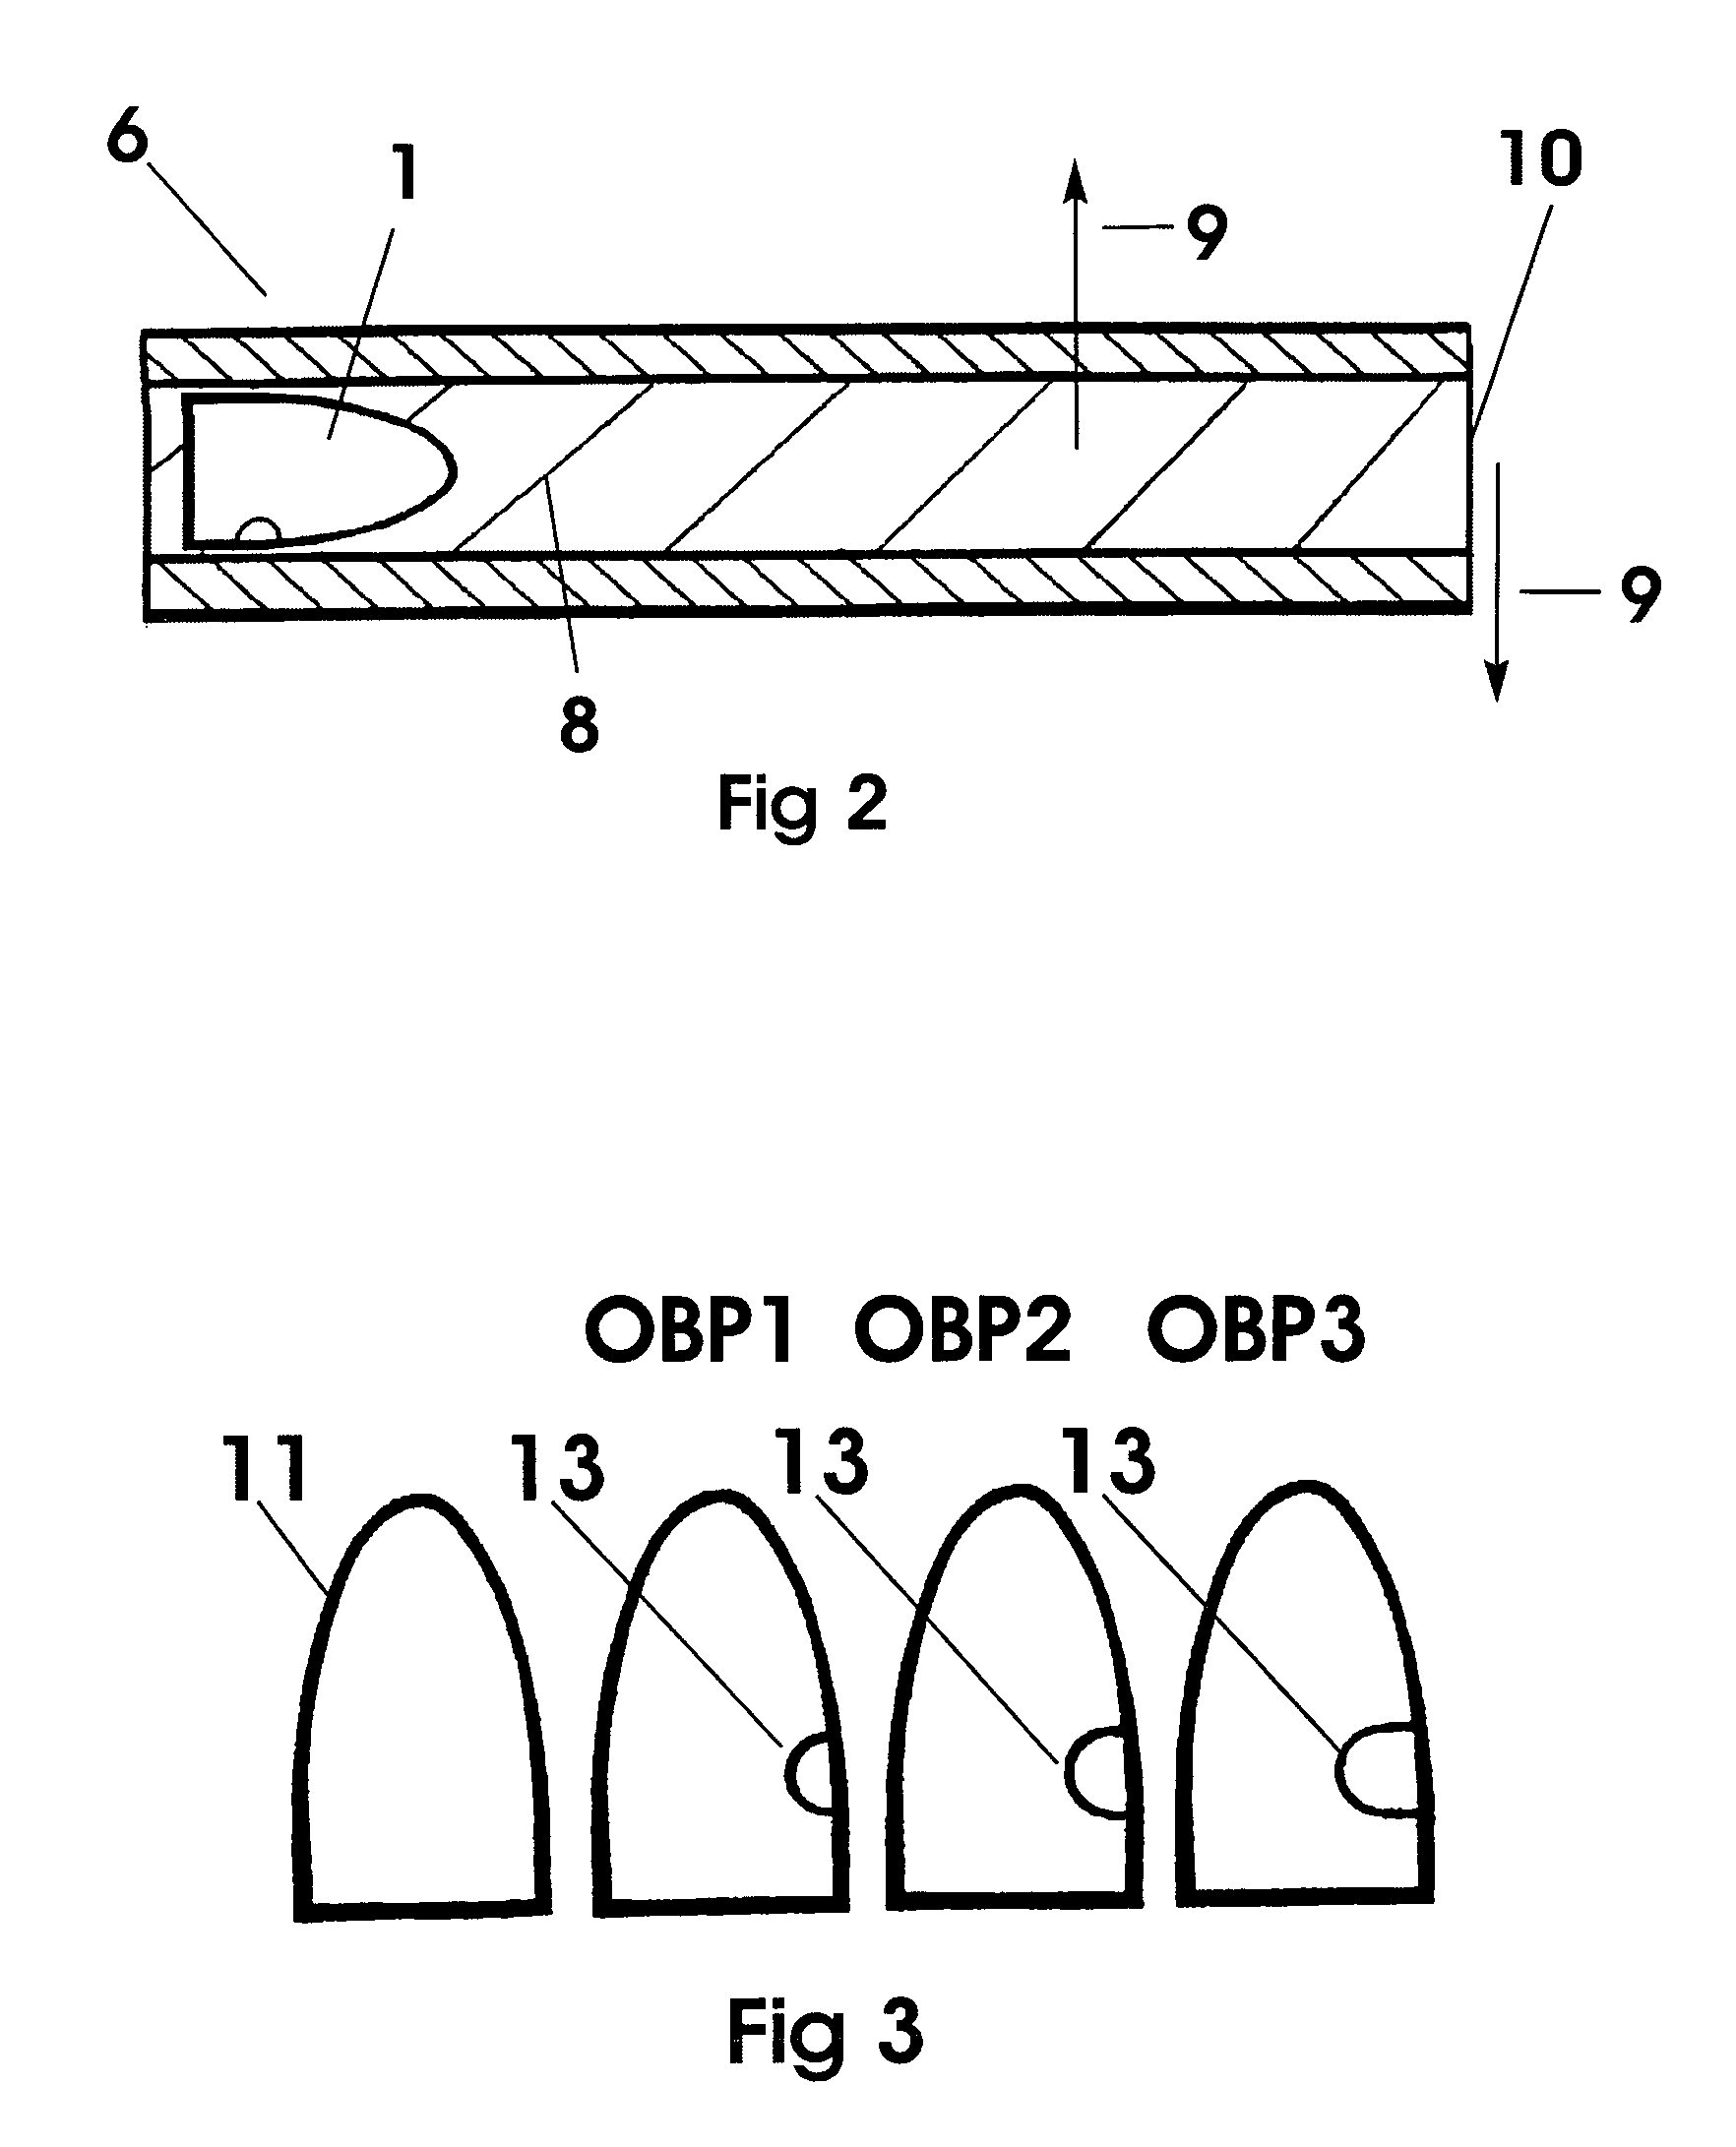 Gun firing method for dispersion of projectiles in a pattern